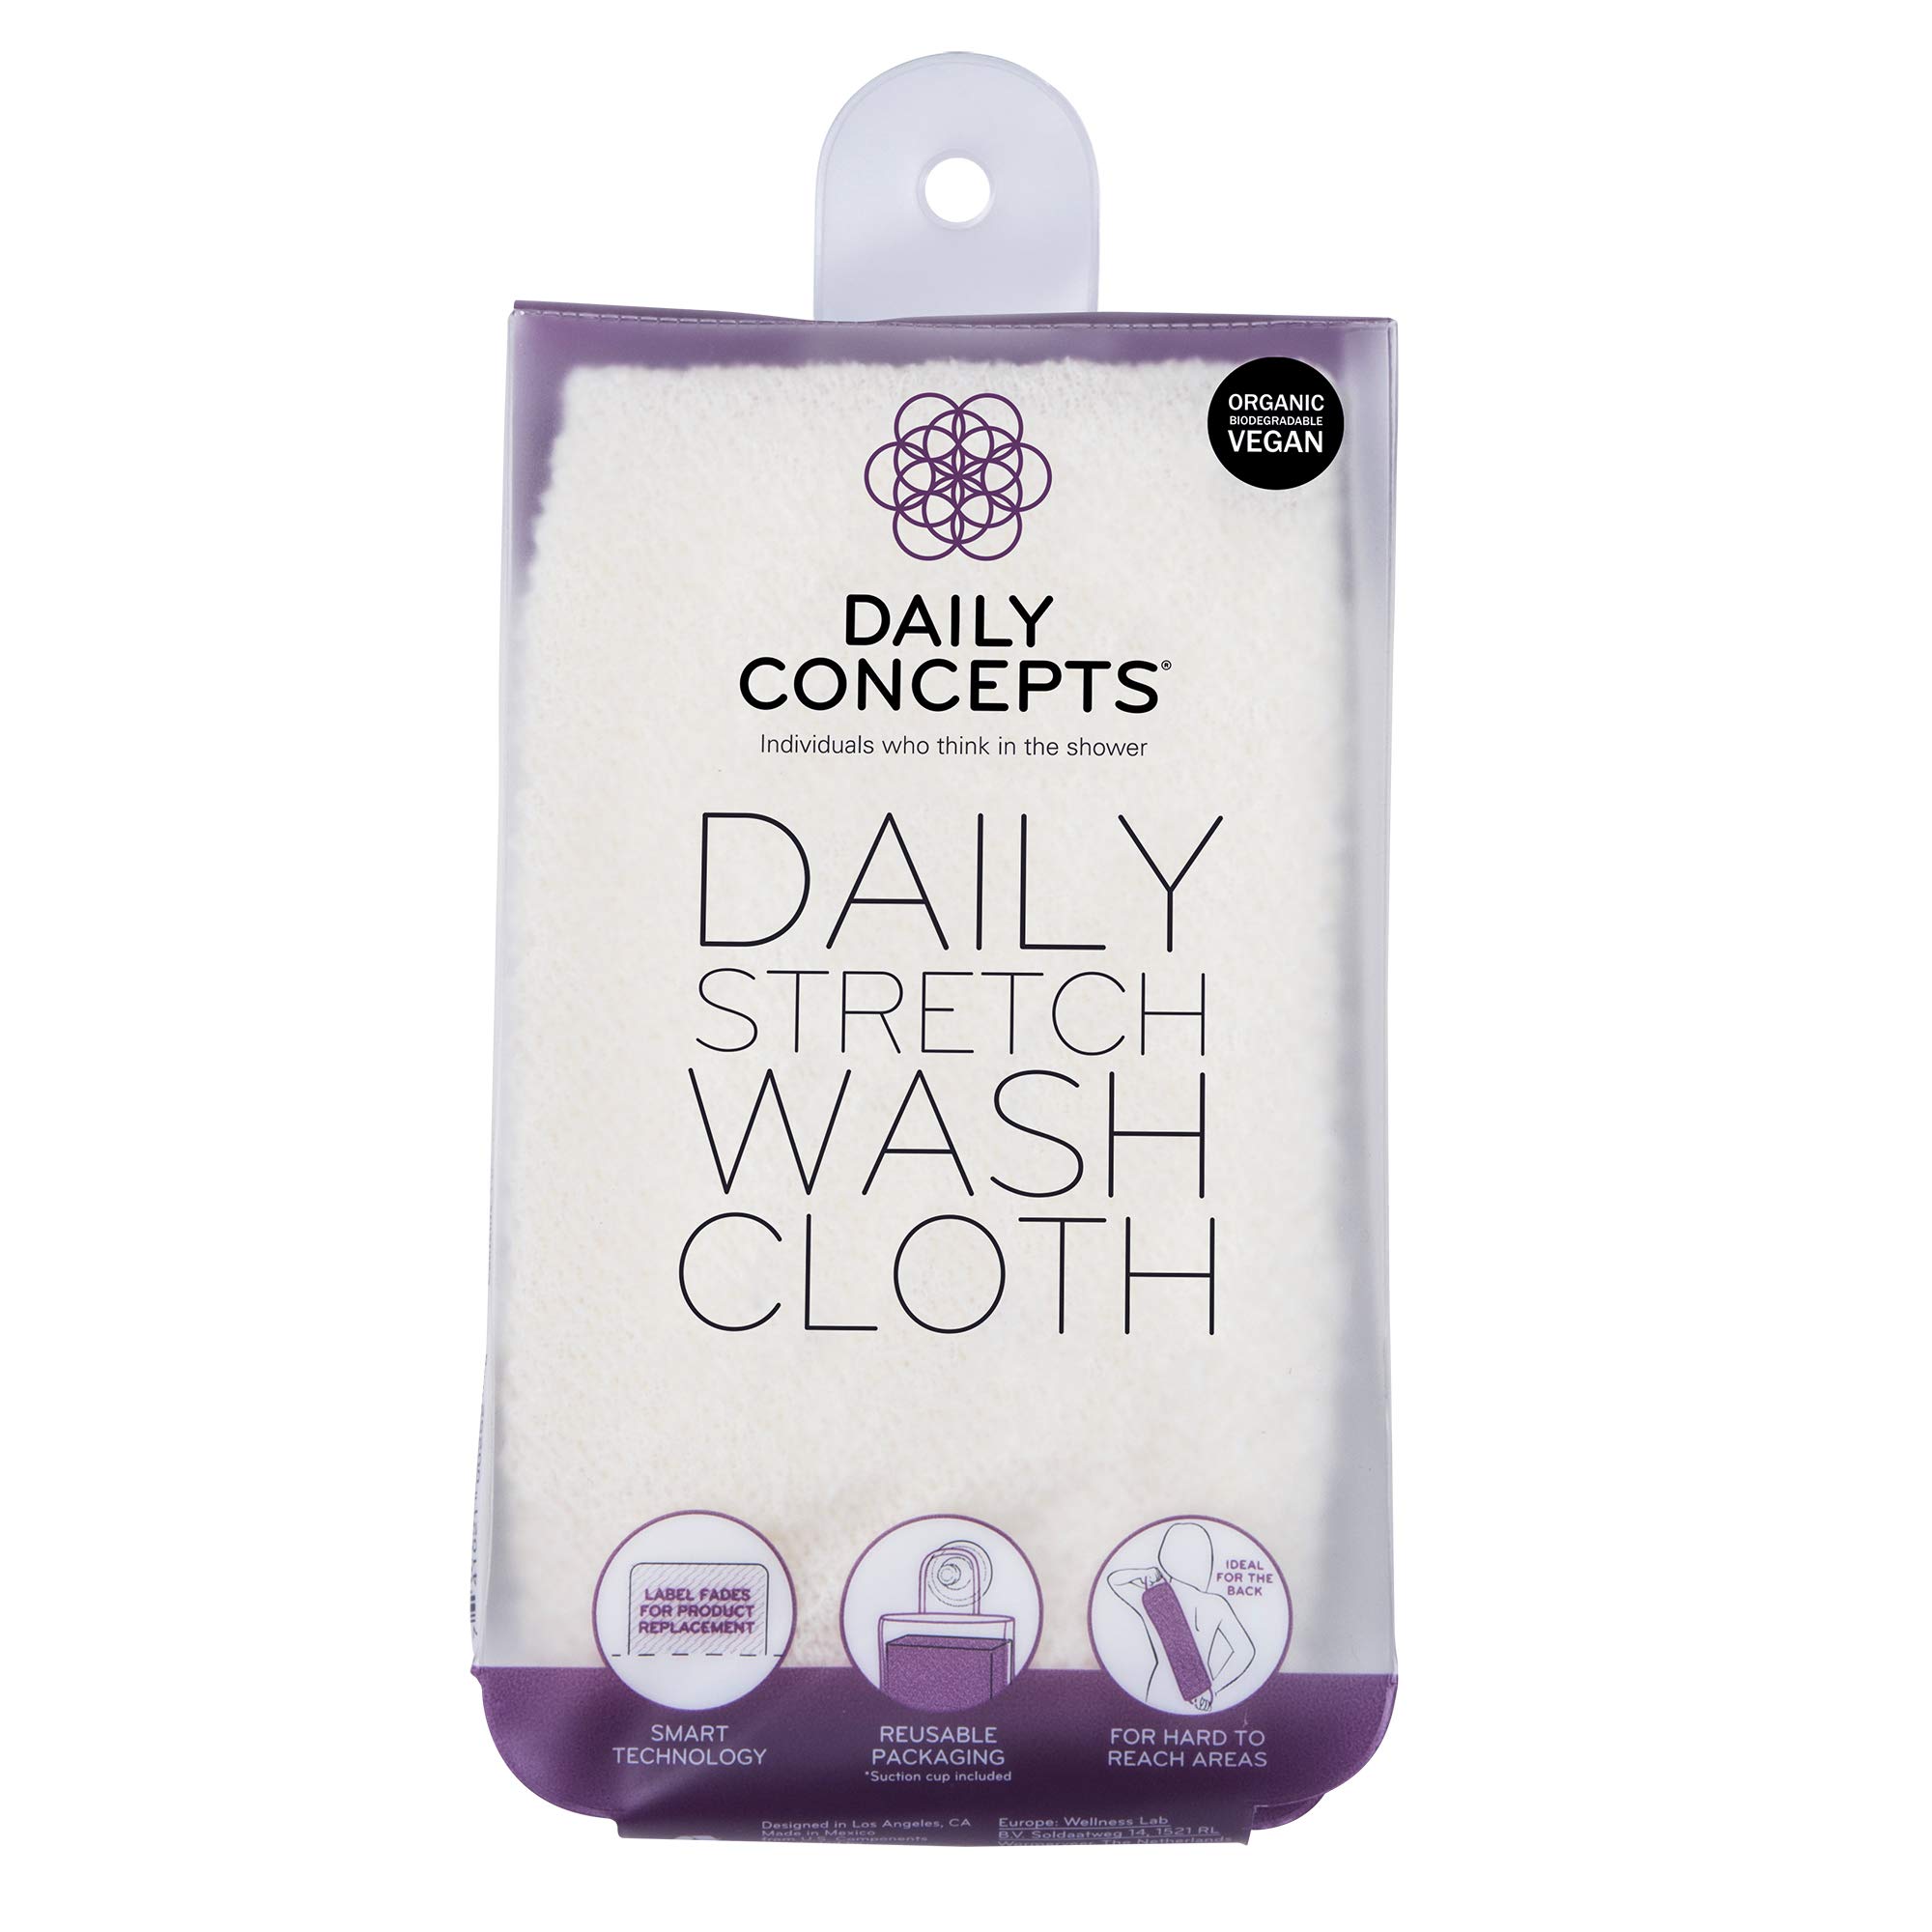 Daily Body Scrubber - Daily Facial Micro Scrubber - Daily Stretch Wash Cloth